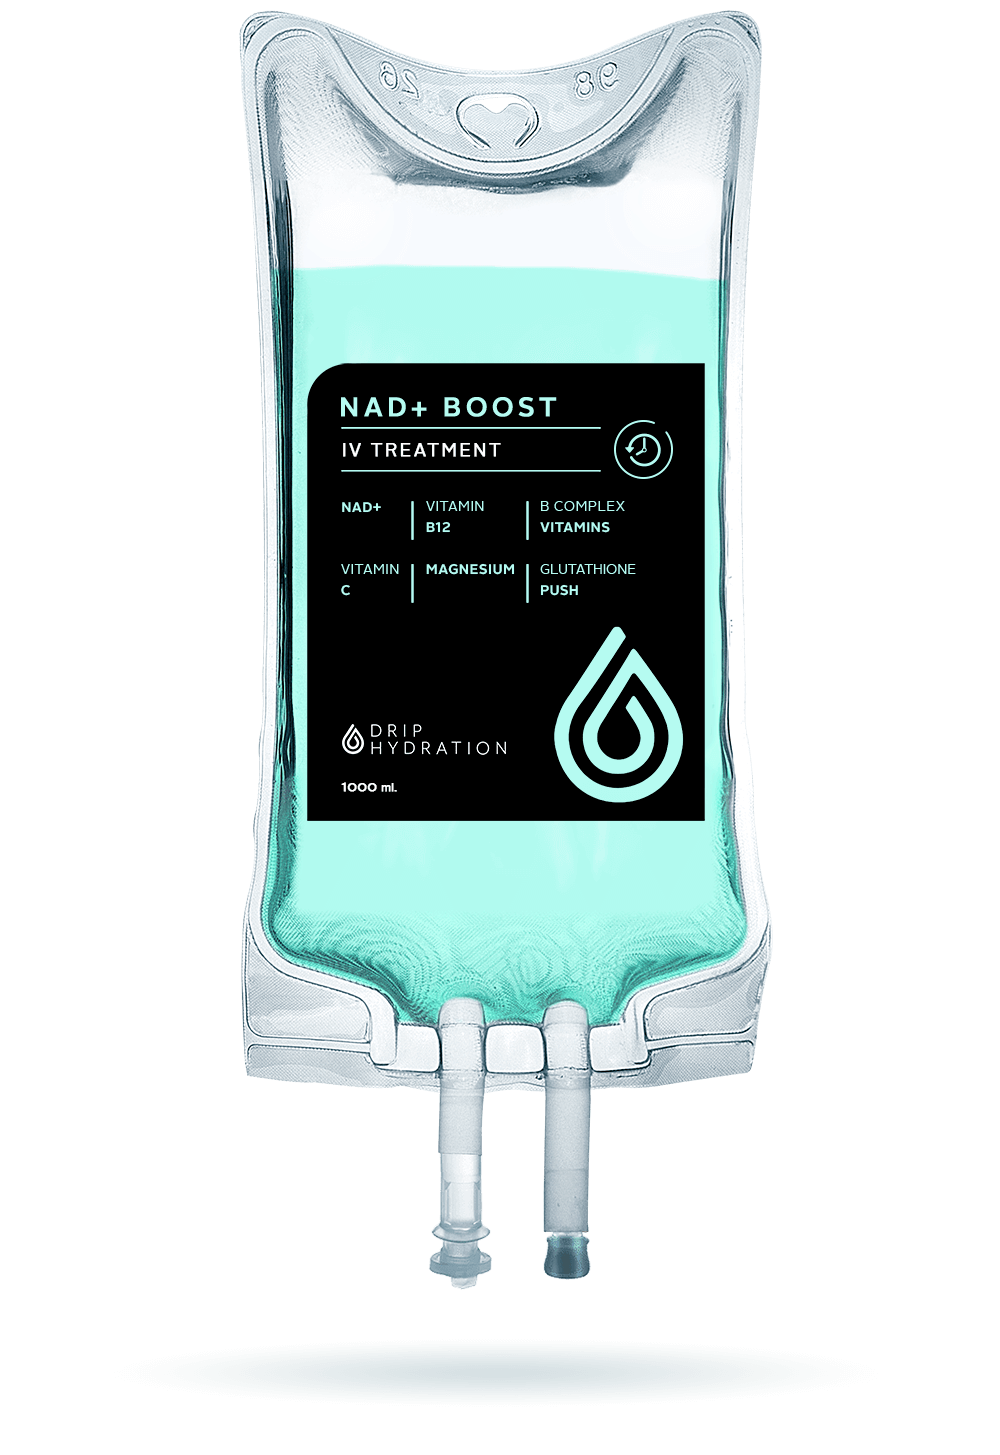 infusion bag named all NAD BOOST IV linking toward the service page